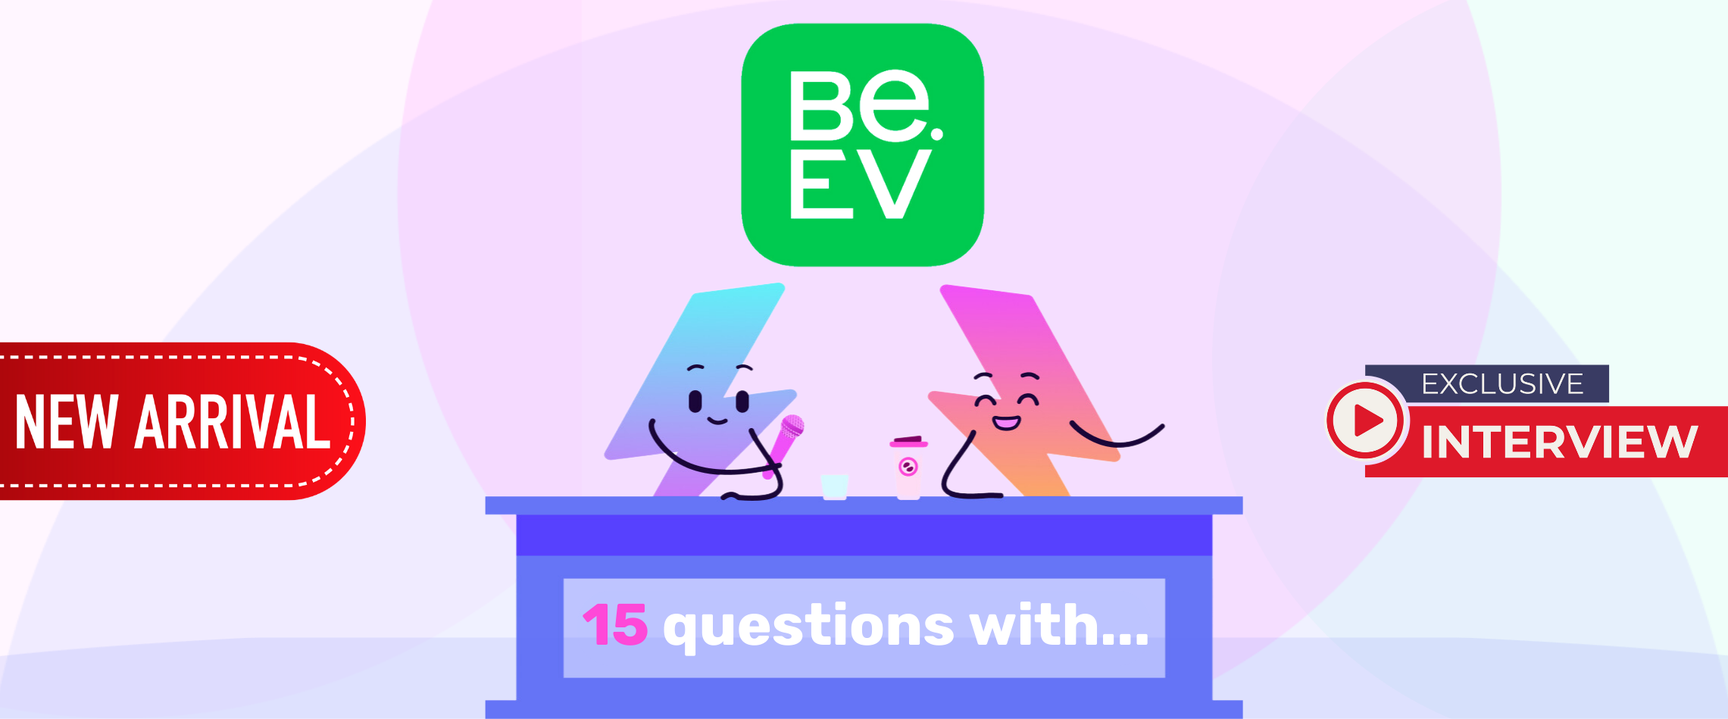 octopus electroverse interview header image with be.ev logo